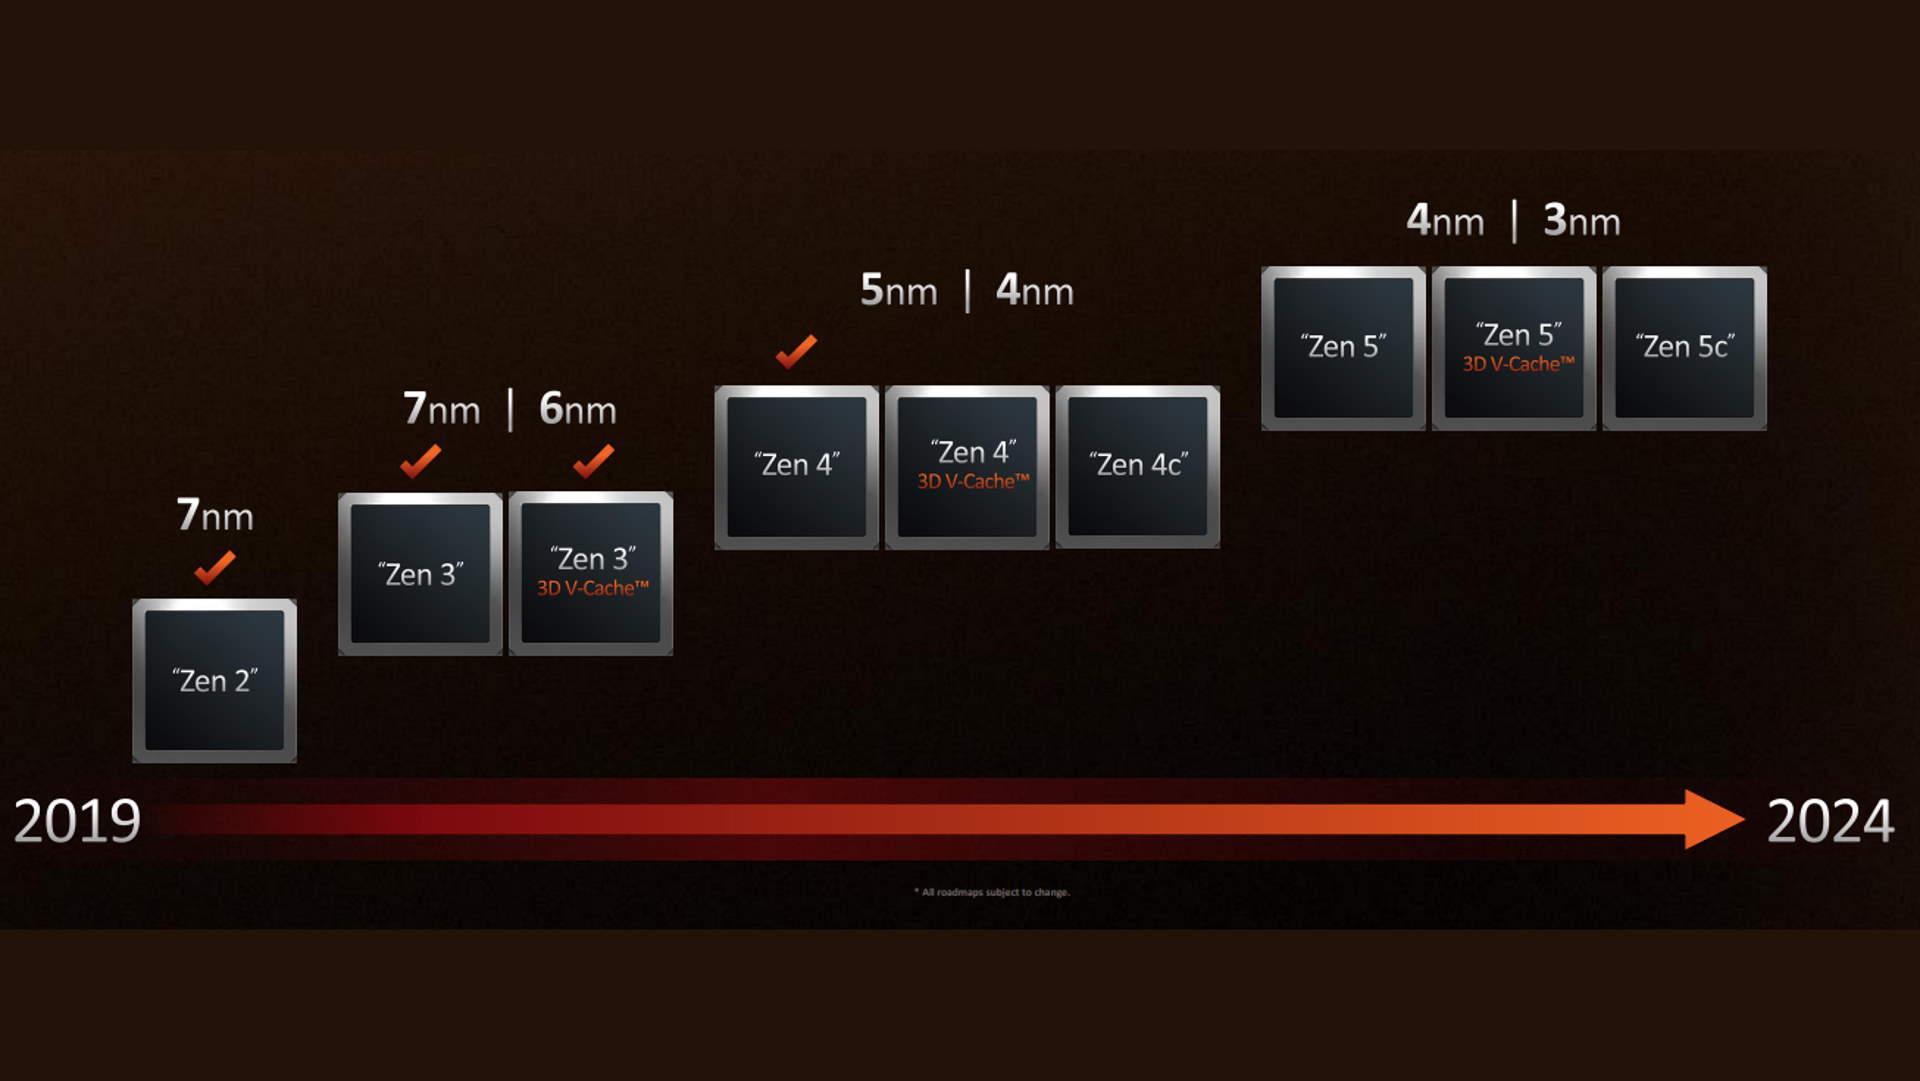 AMD plans to support the new AM5 socket through 2025 and beyond